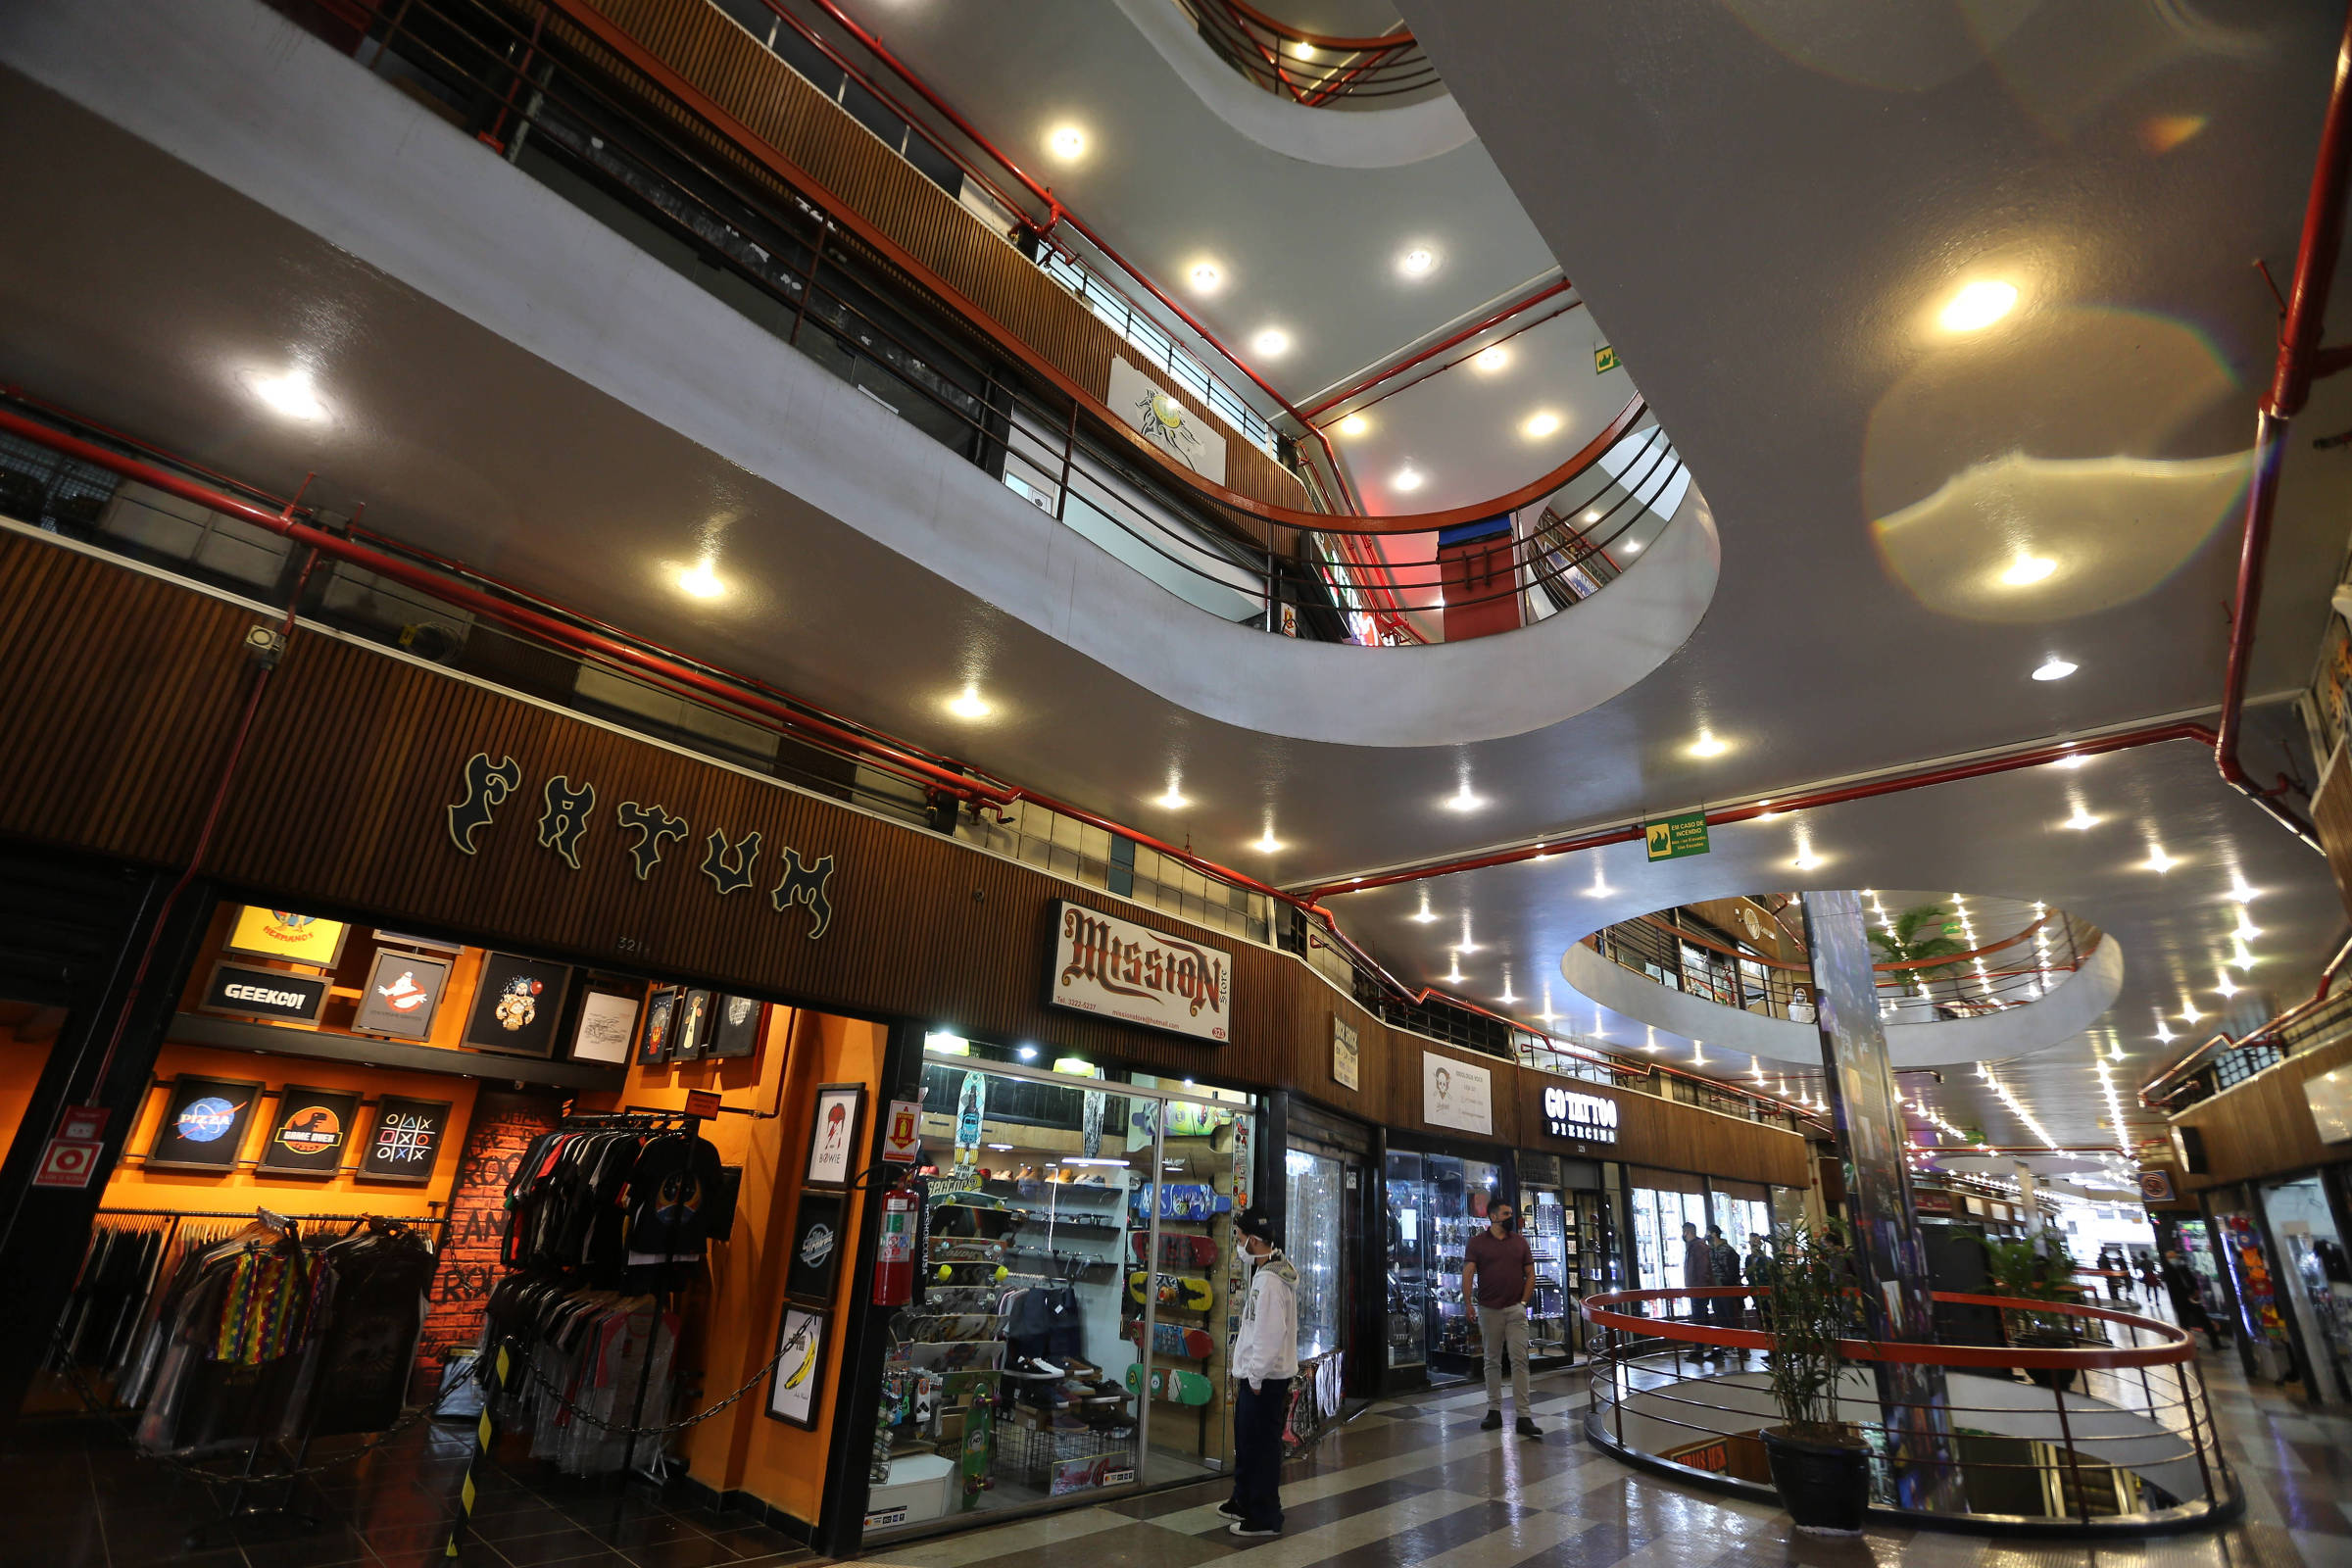 Galeria Do Rock Rock Gallery Shopping Mall in Dowtown Sao Paulo